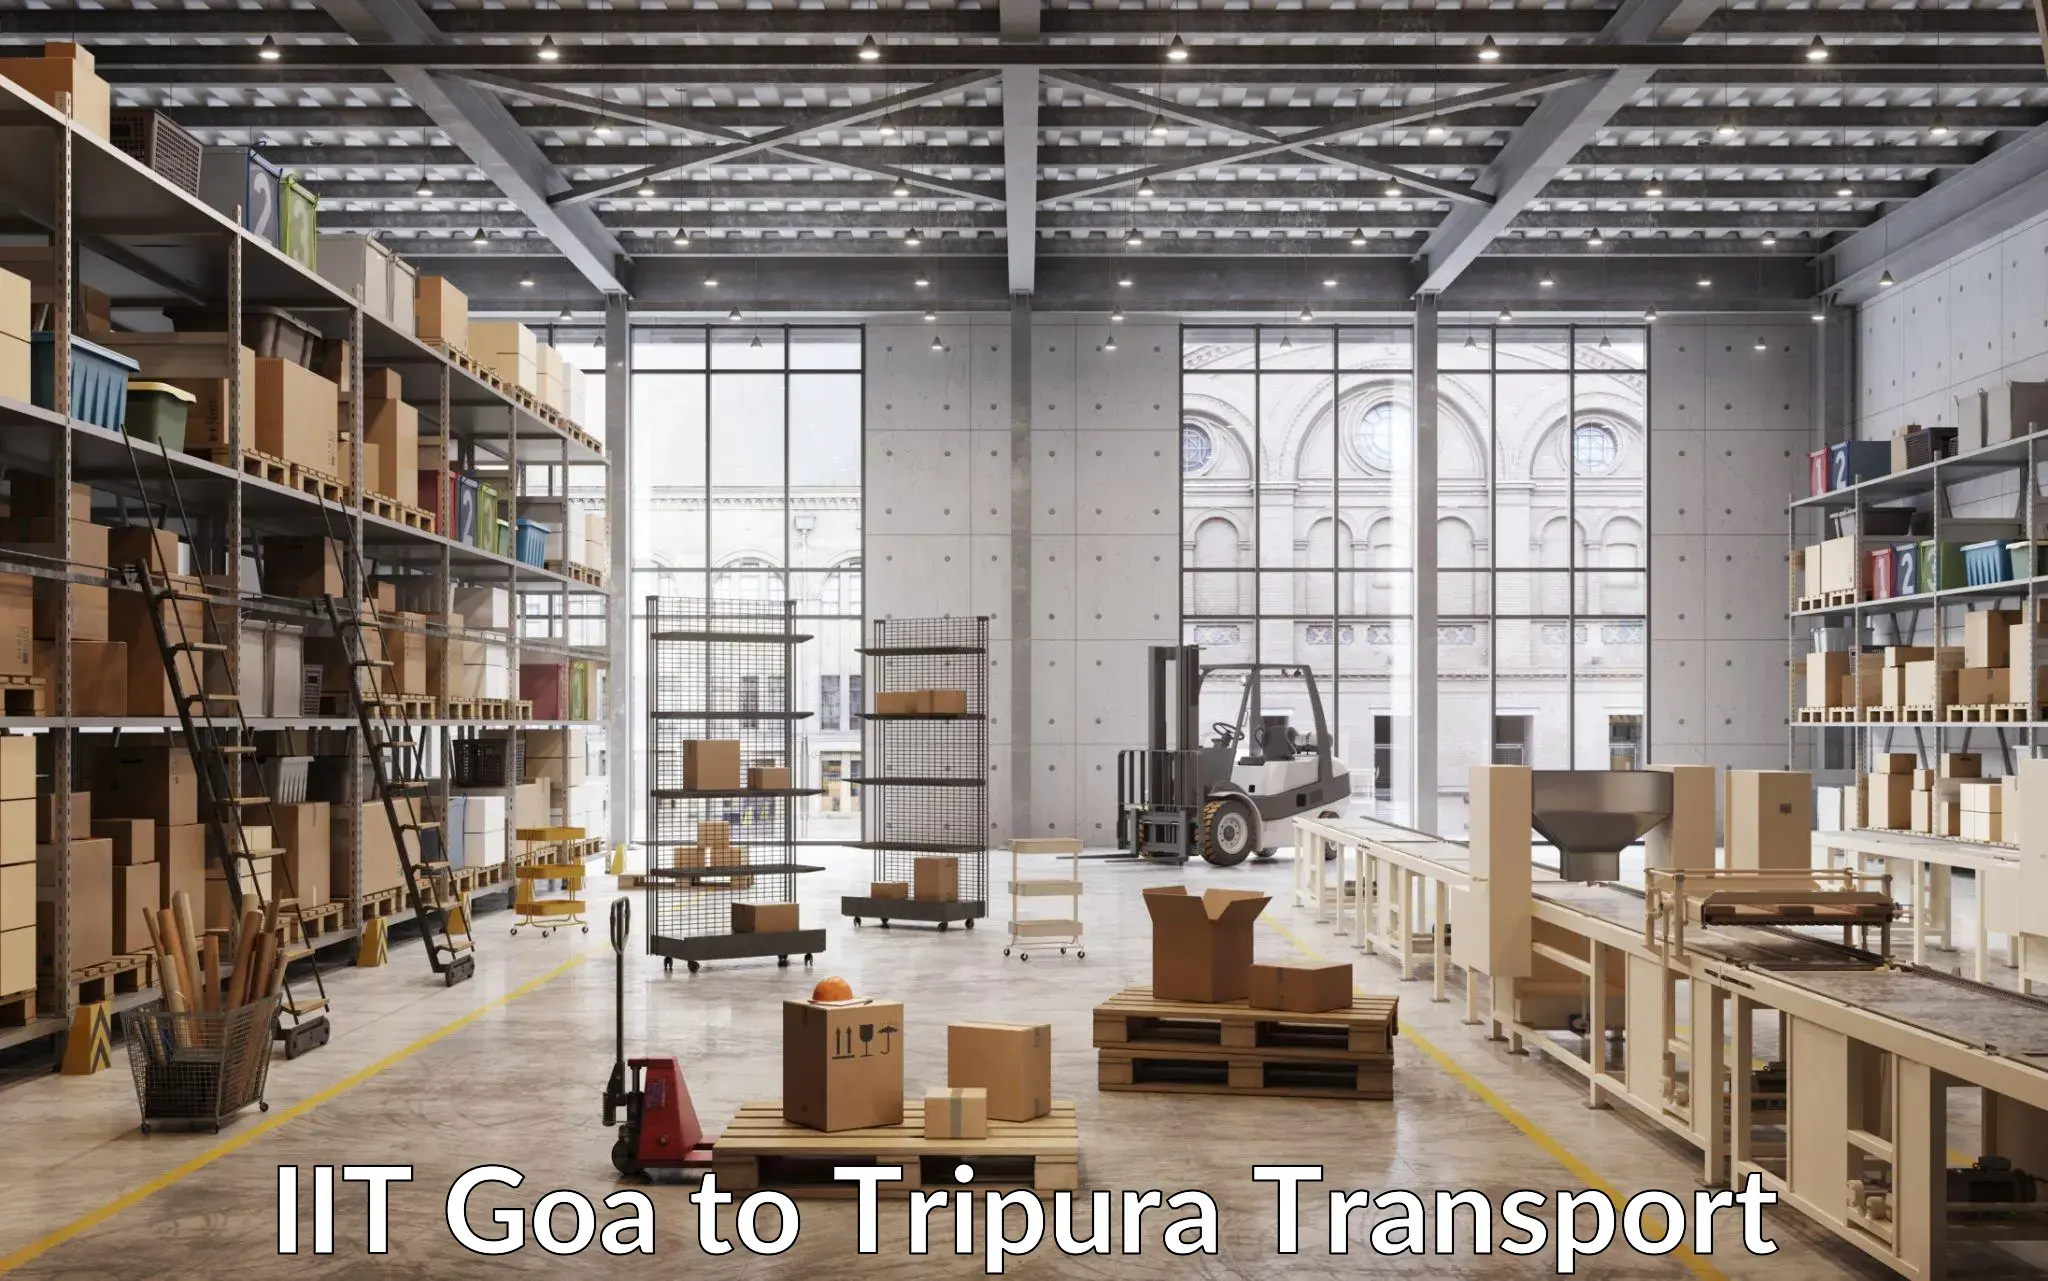 Nearby transport service IIT Goa to Udaipur Tripura